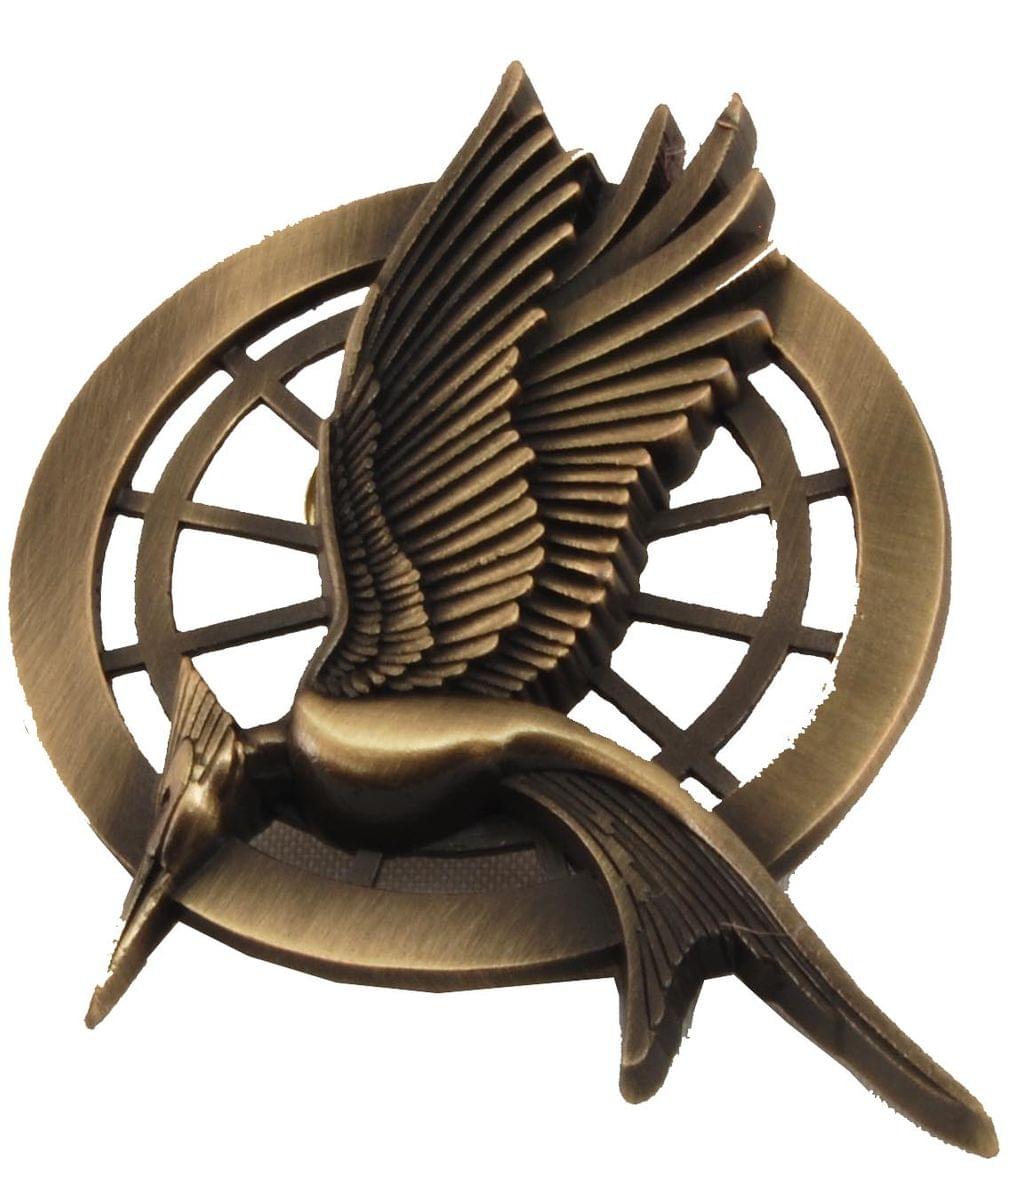 hunger games catching fire mockingjay symbol